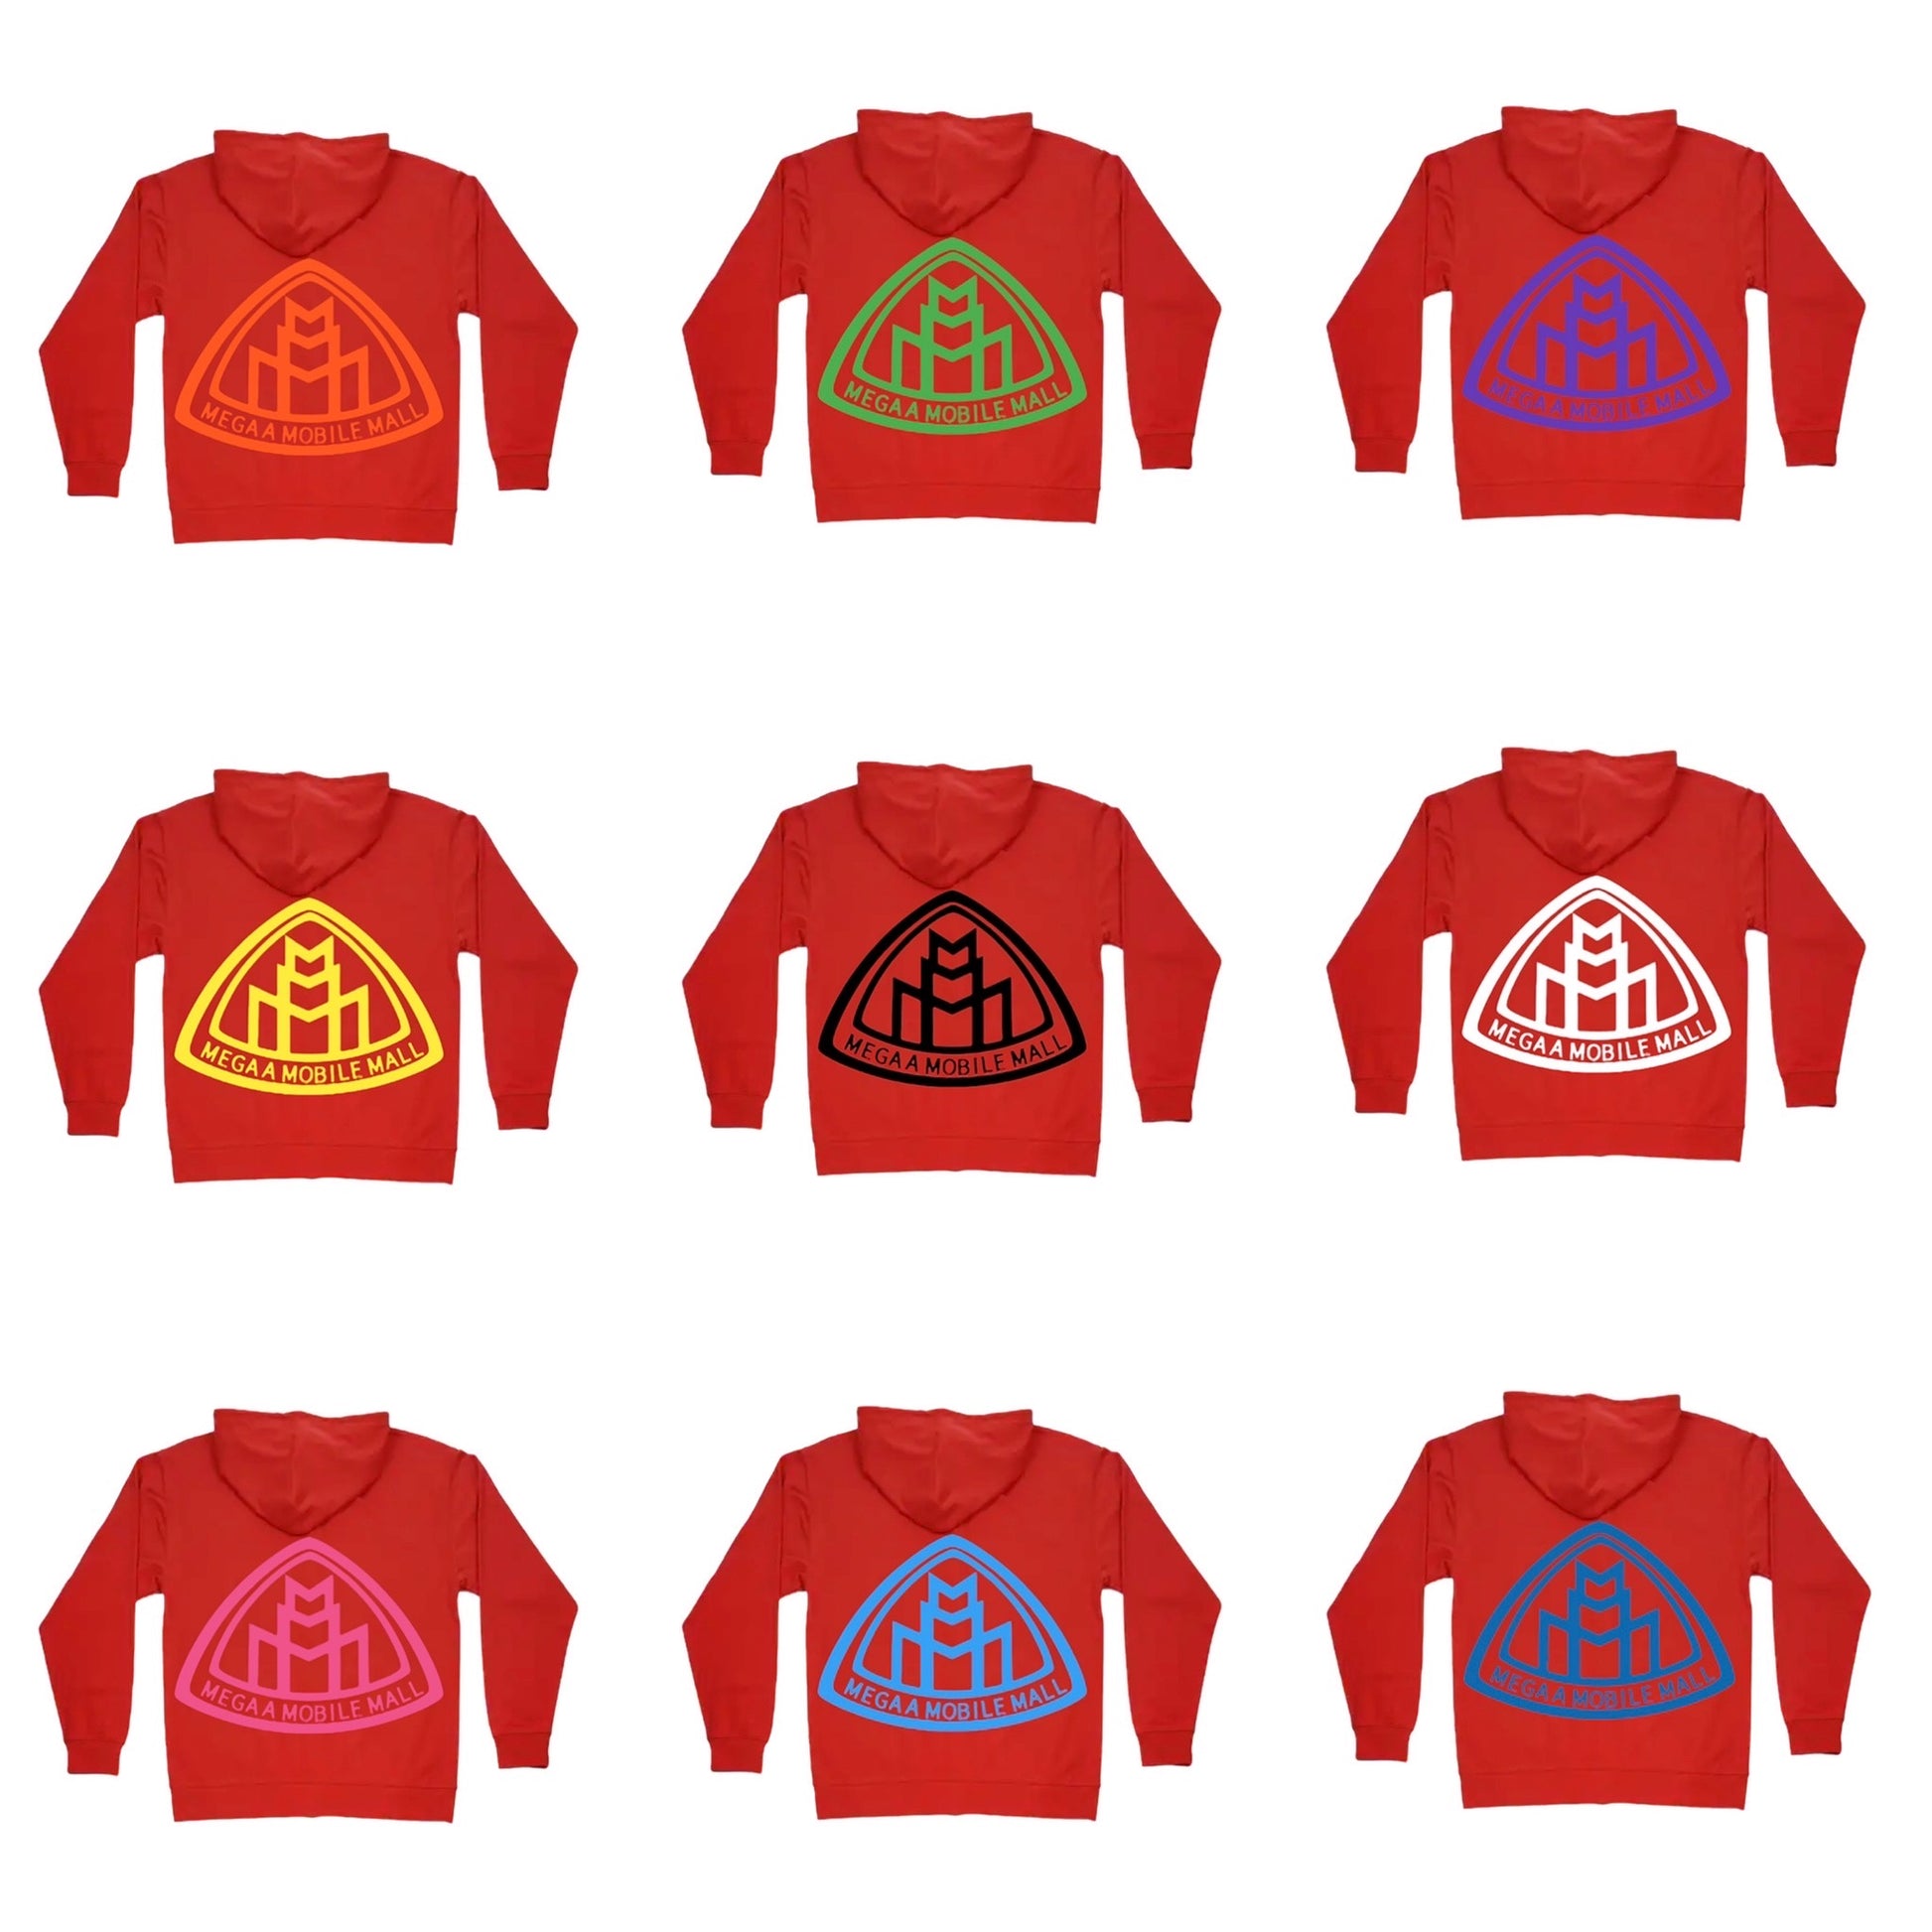 megaamobilemall red zip up hoodie in 9 different logo color options back side